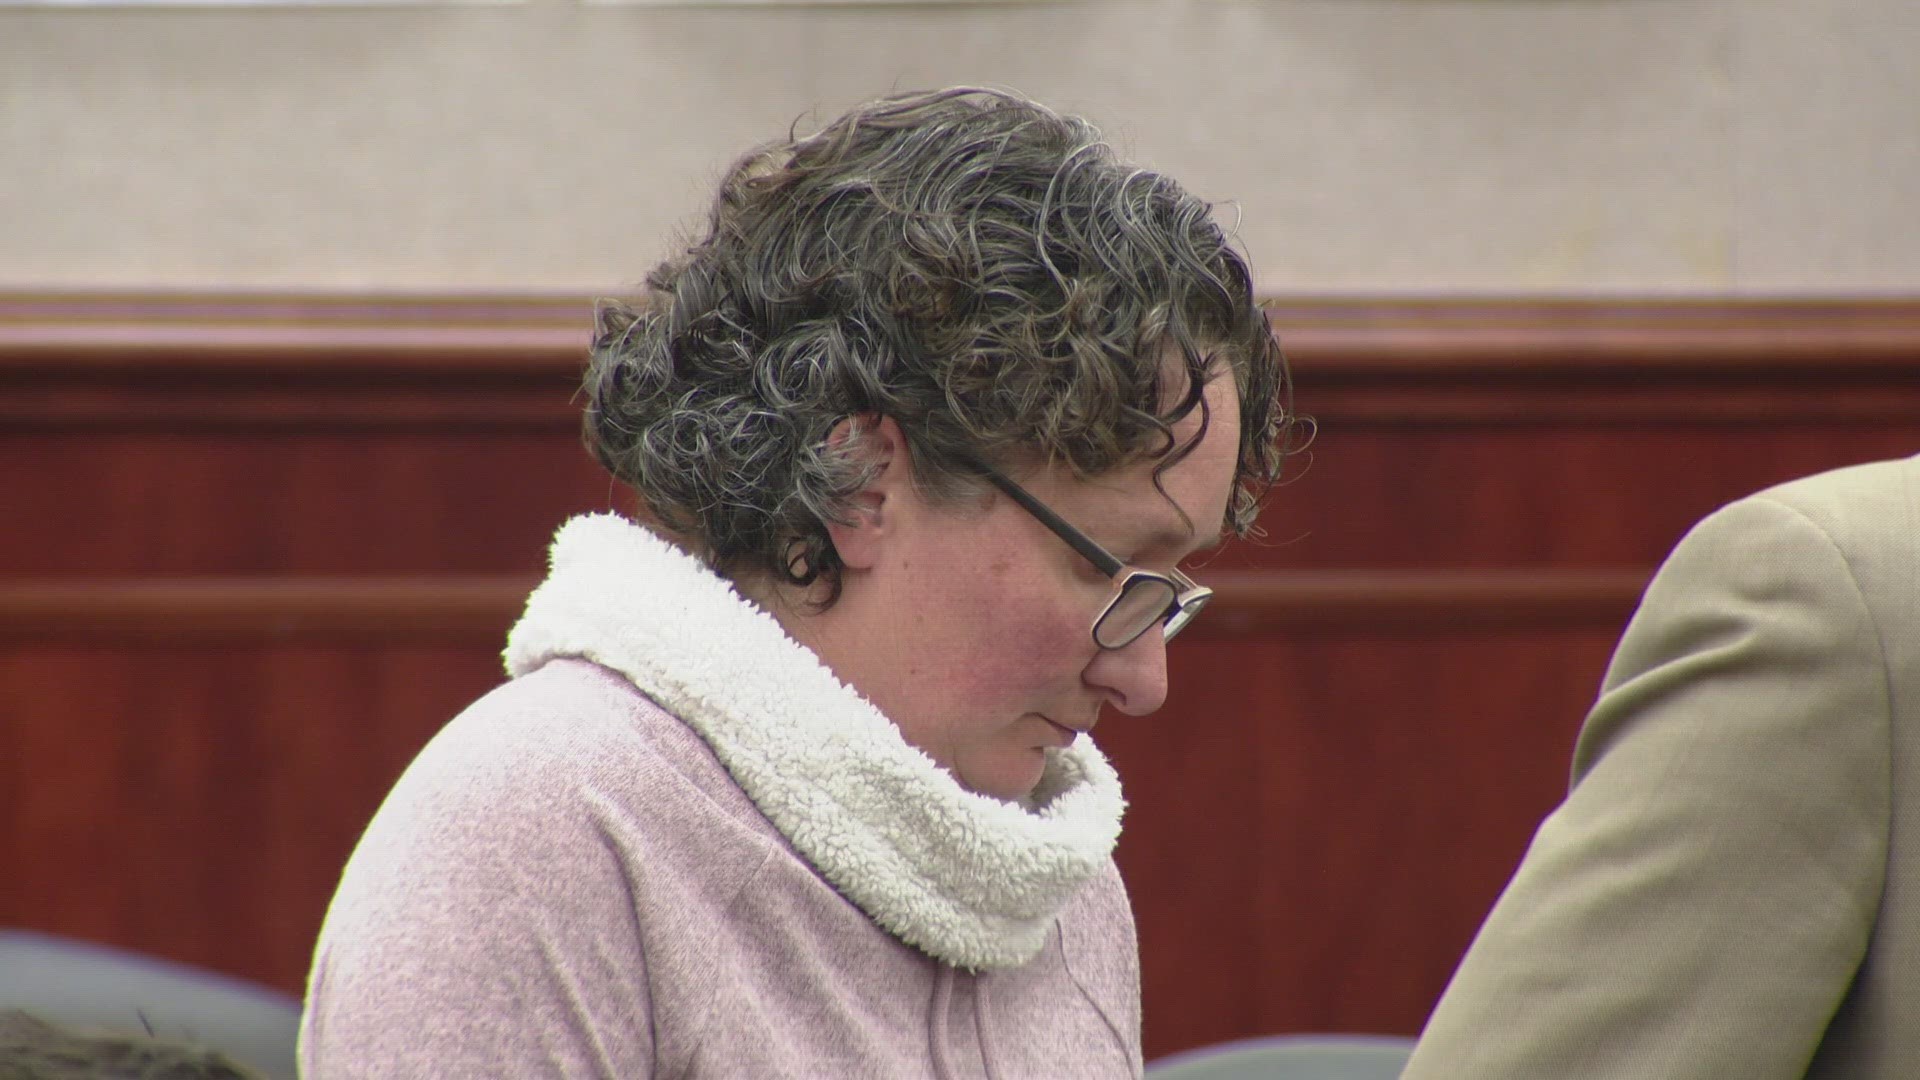 Robin Niceta was accused of making a false child sexual abuse report against an Aurora city councilwoman.